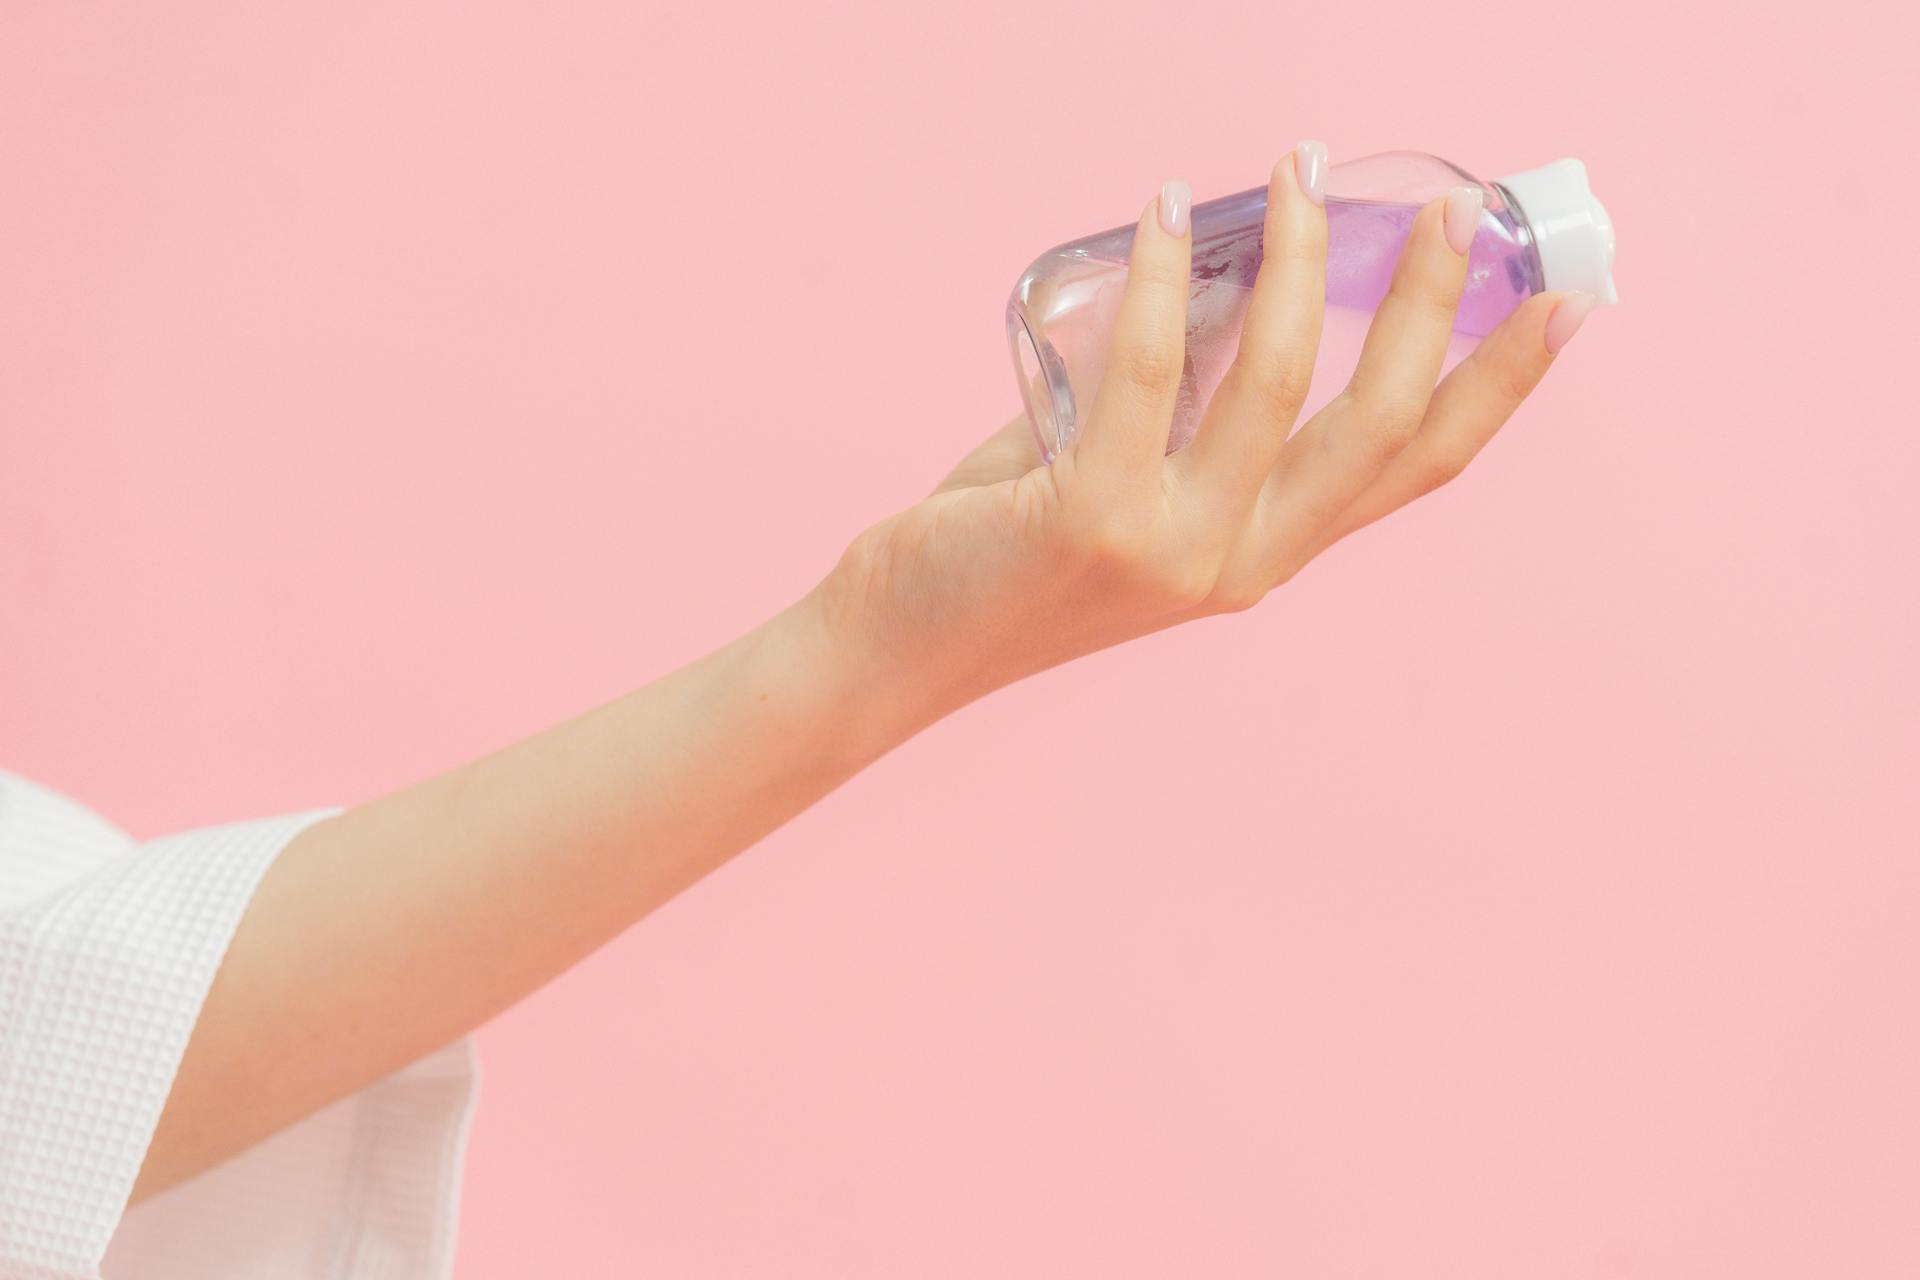 Woman holding a bottle of baby oil | Source: Pexels